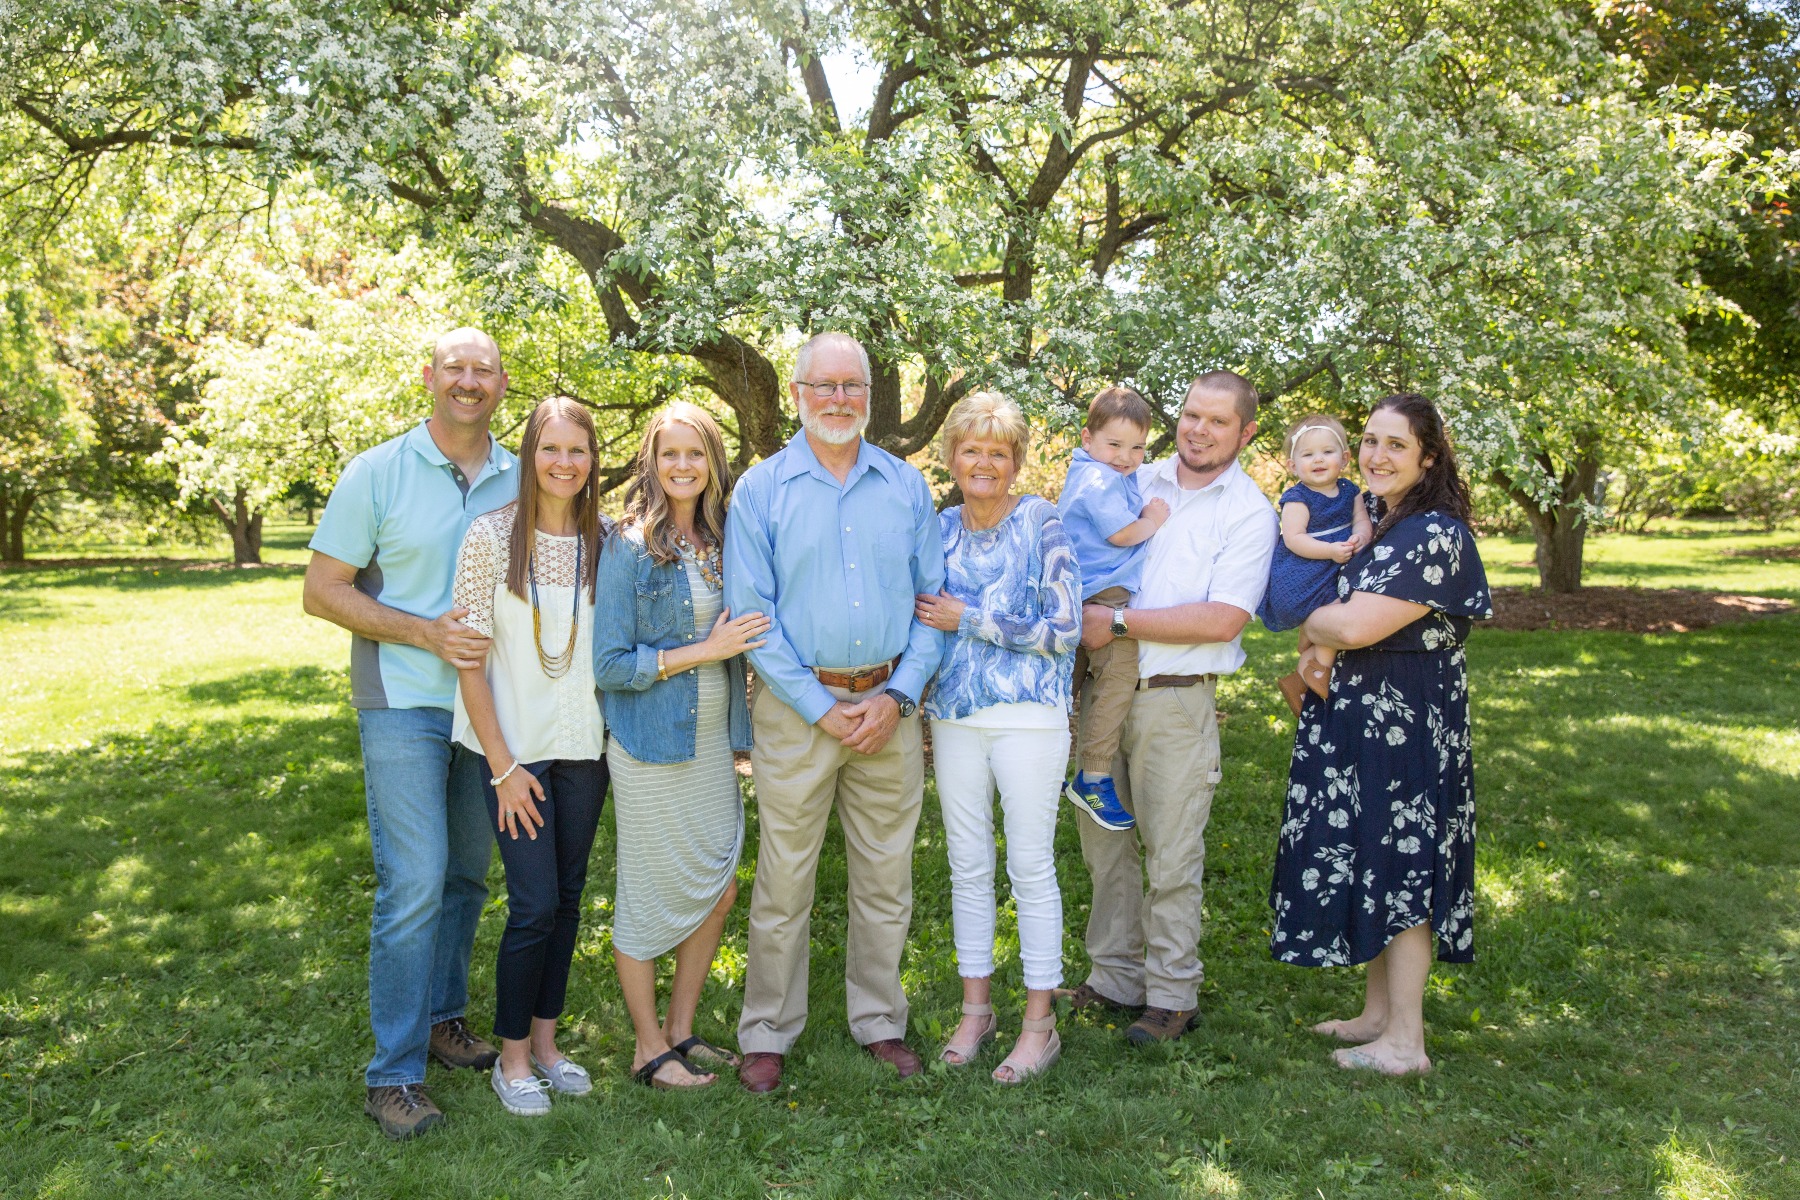 extended family of 9 in shades of blue & white under a white cherry tree